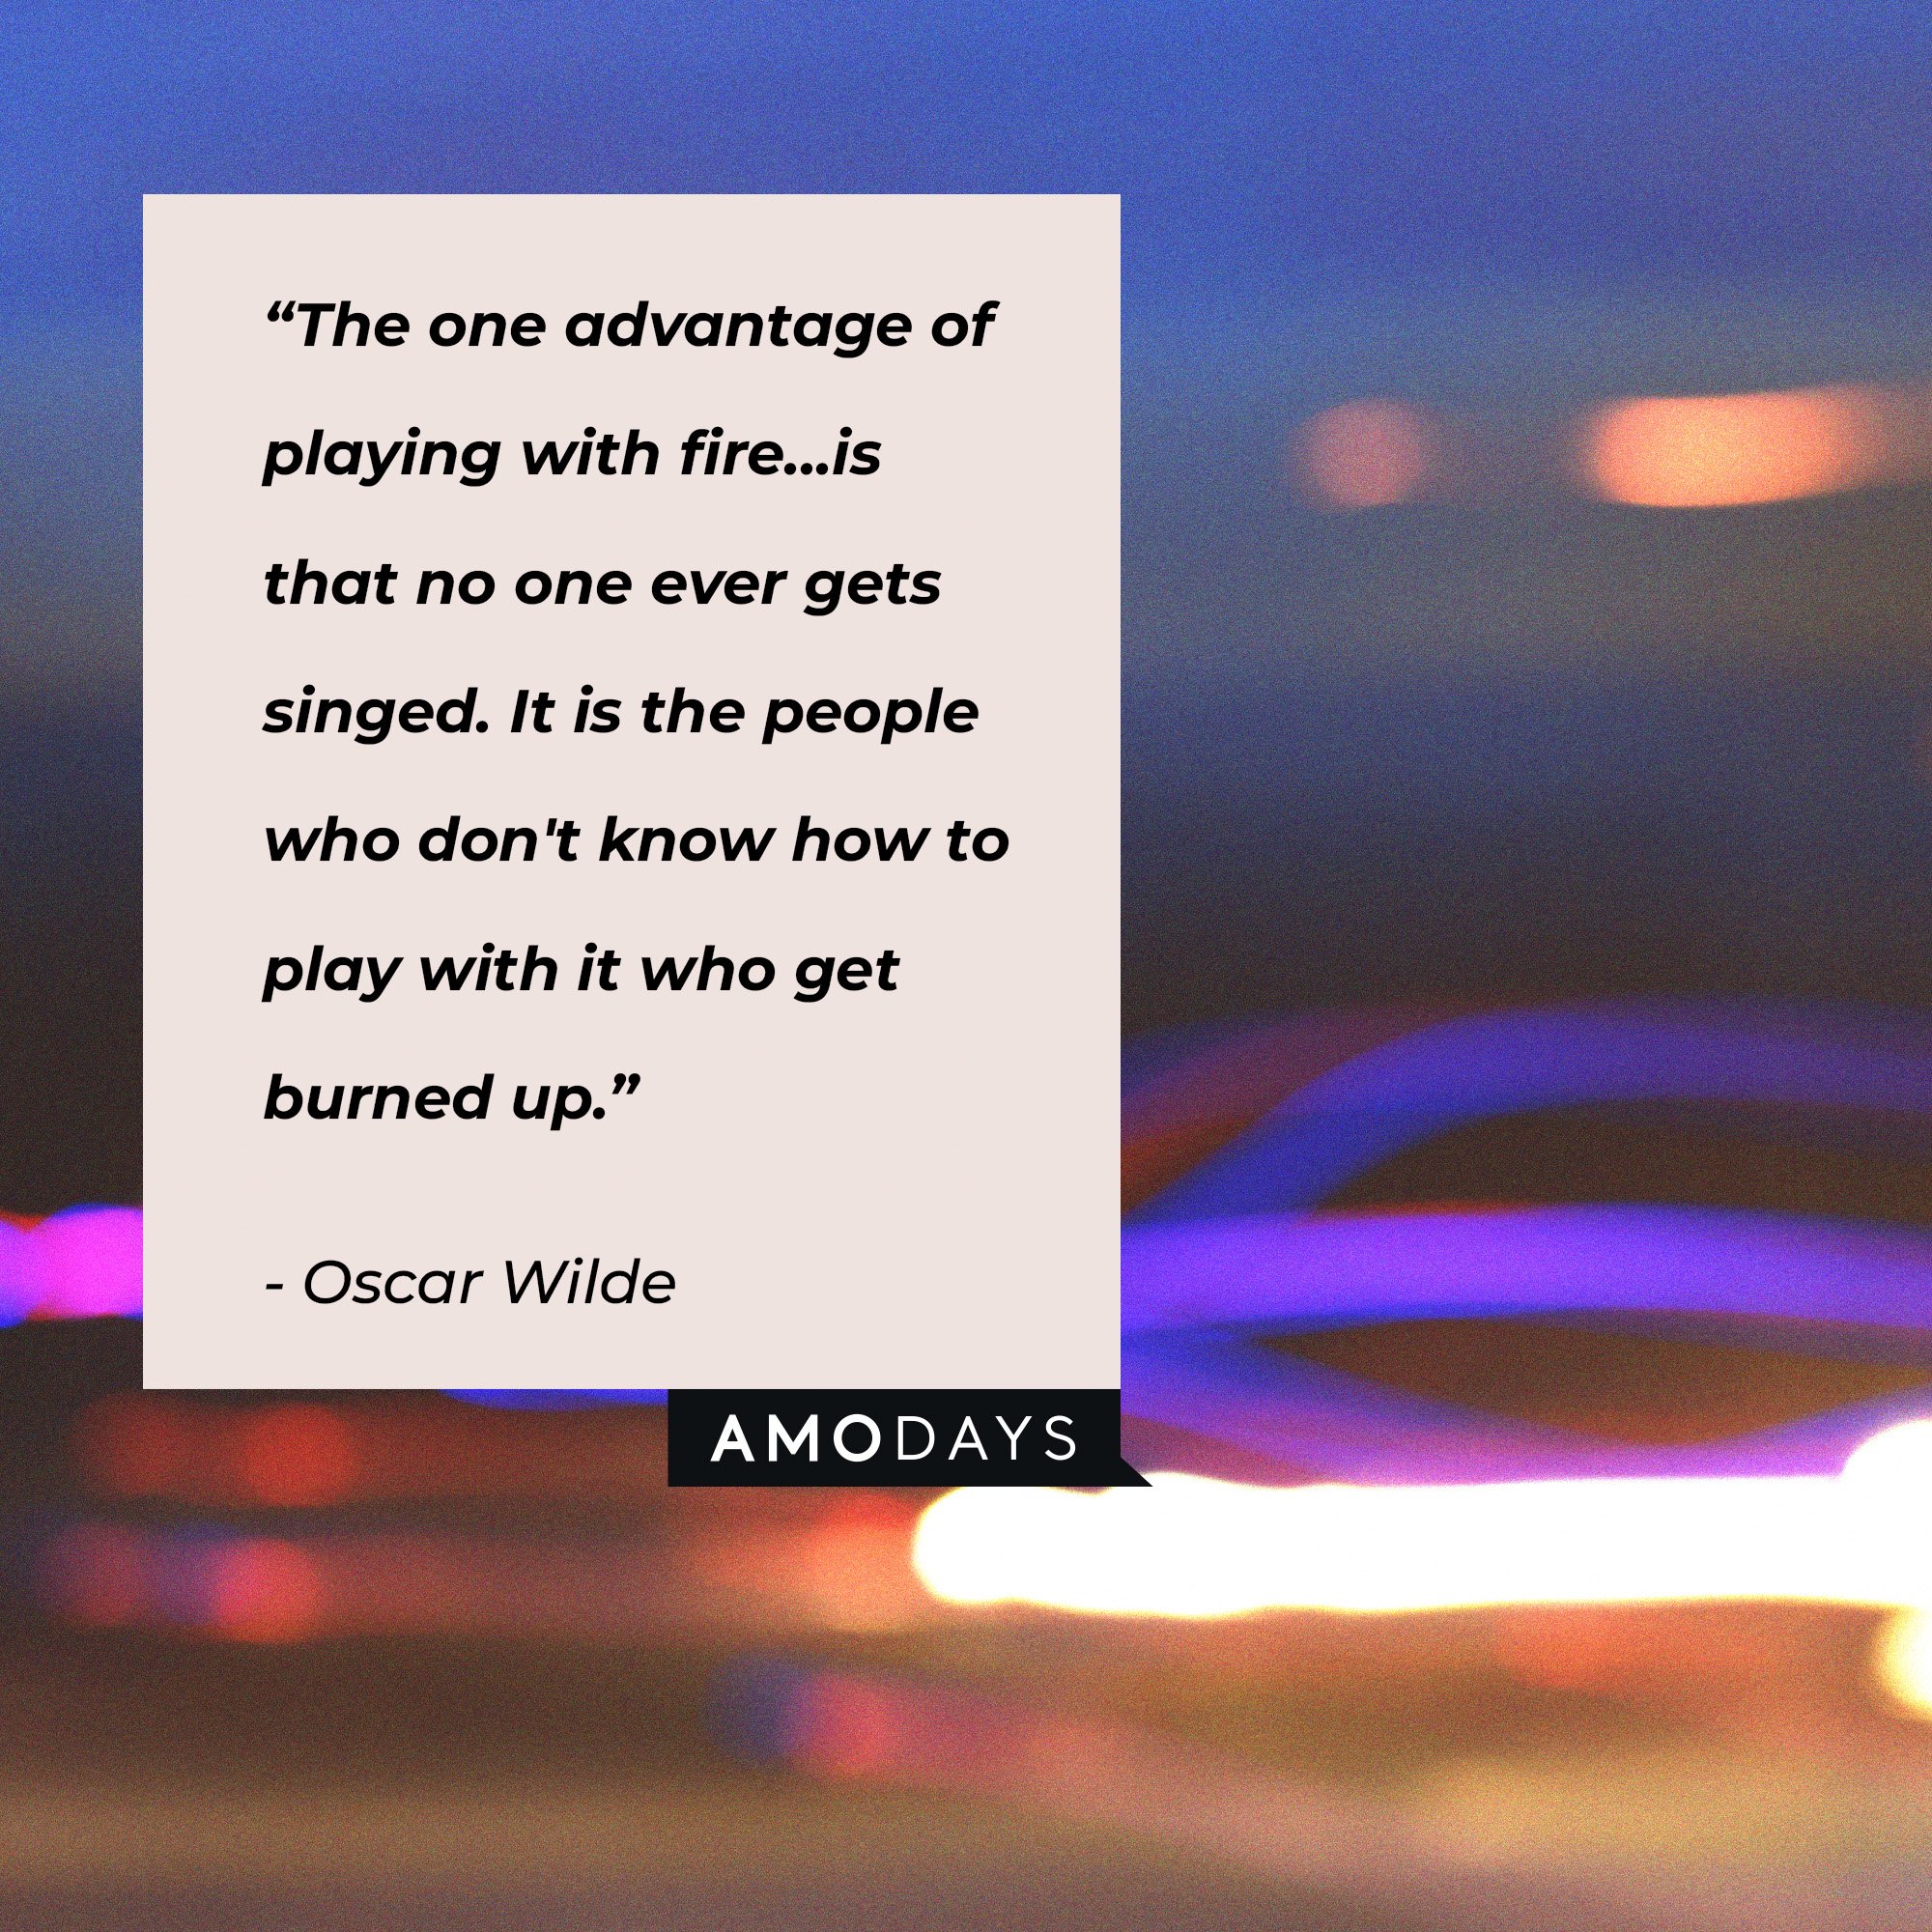 Oscar Wilde's quote: “The one advantage of playing with fire...is that no one ever gets singed. It is the people who don't know how to play with it who get burned up.” | Image: AmoDays